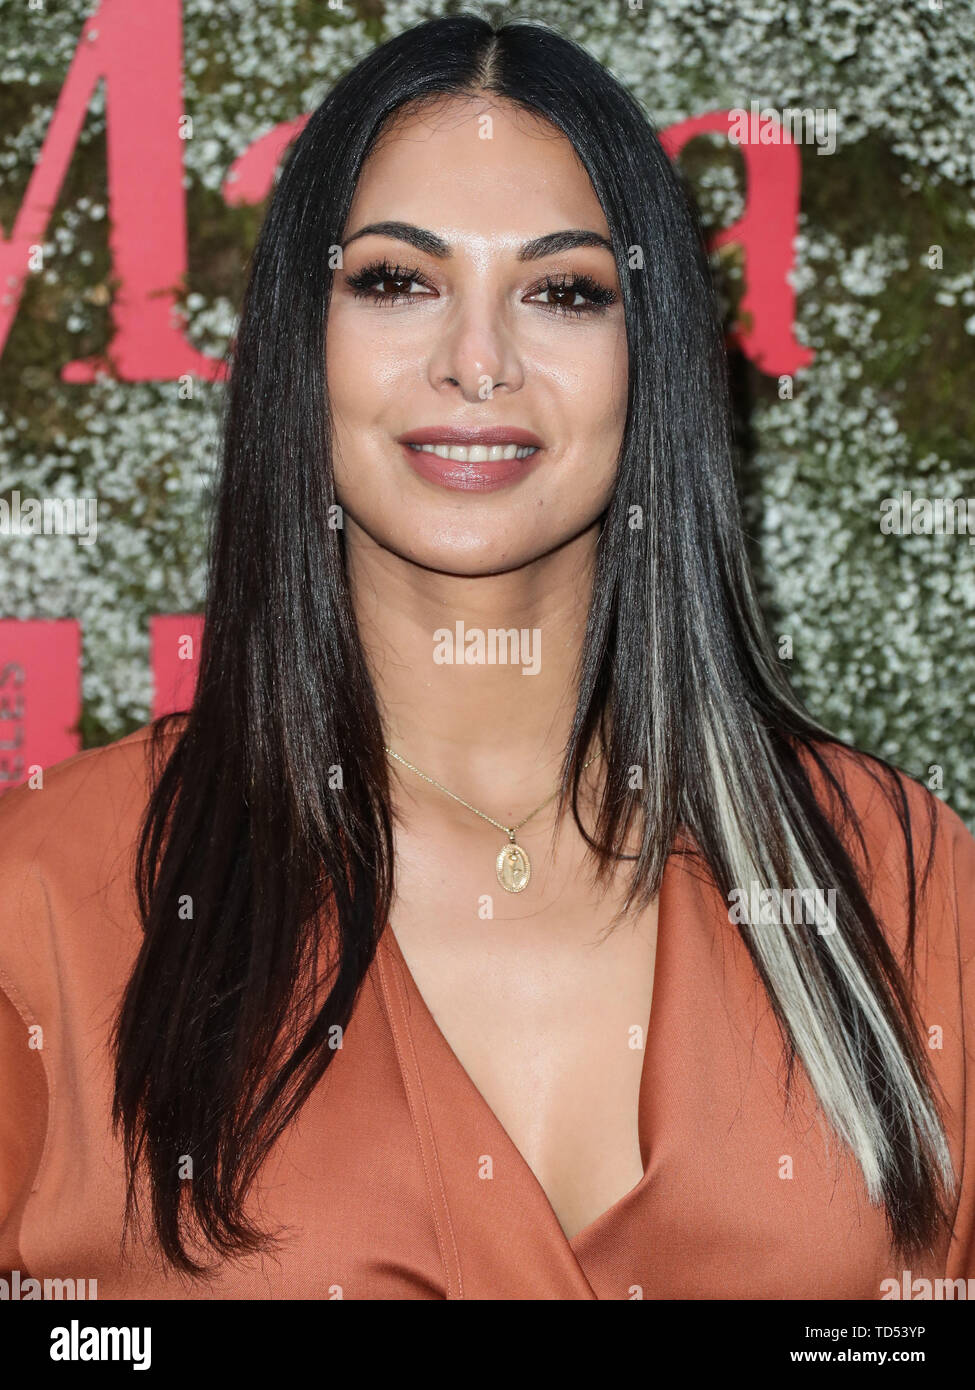 WEST HOLLYWOOD, LOS ANGELES, CALIFORNIA, USA - JUNE 11: Actress Moran Atias arrives at the InStyle Max Mara Women In Film Celebration held at Chateau Marmont on June 11, 2019 in West Hollywood, Los Angeles, California, USA. (Photo by Xavier Collin/Image Press Agency) Stock Photo